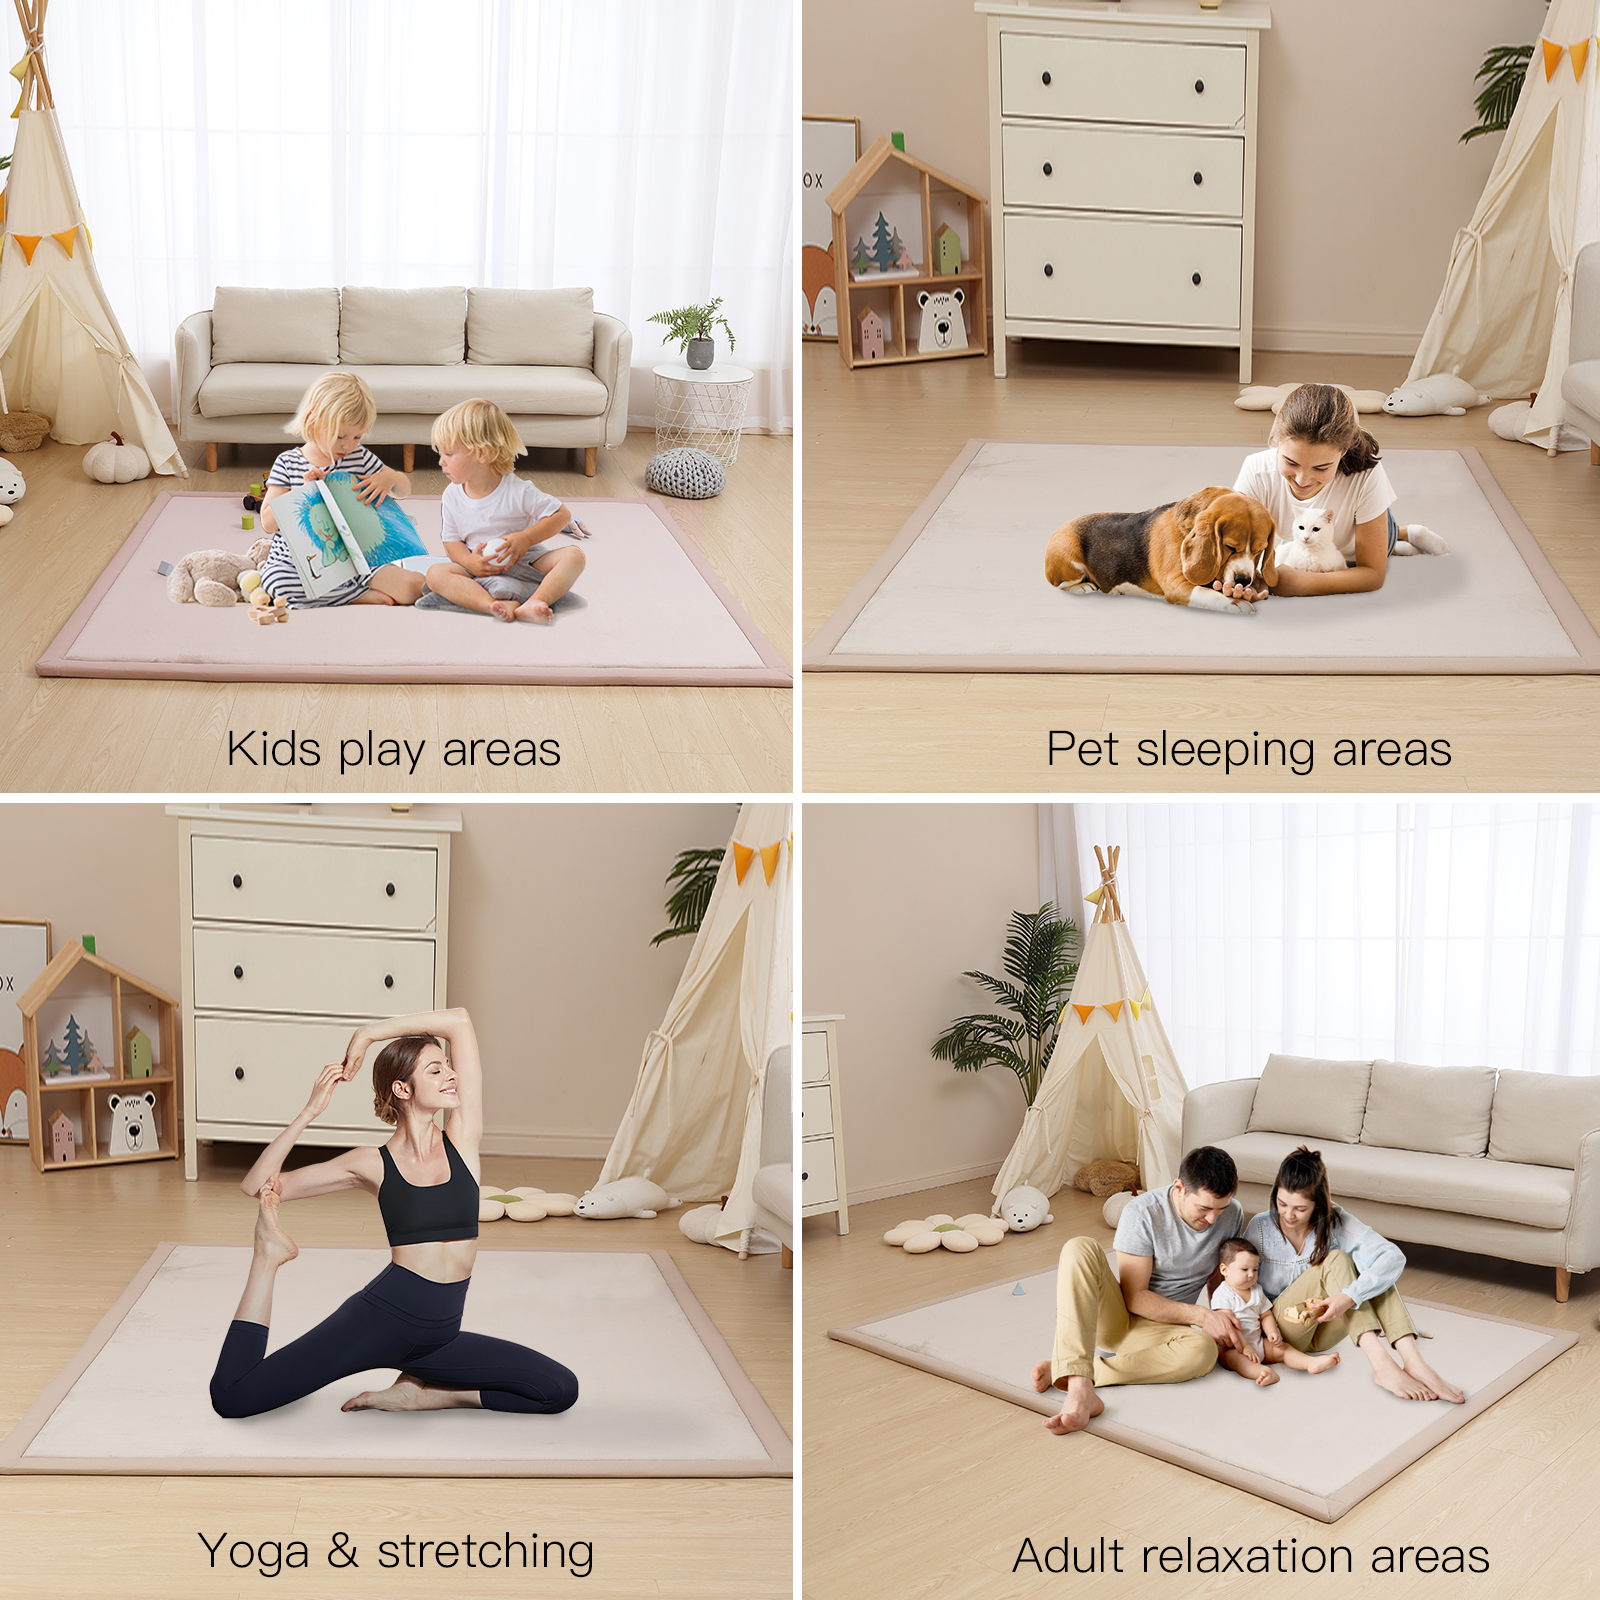 Soft Touch Tatami Rug (Beige)